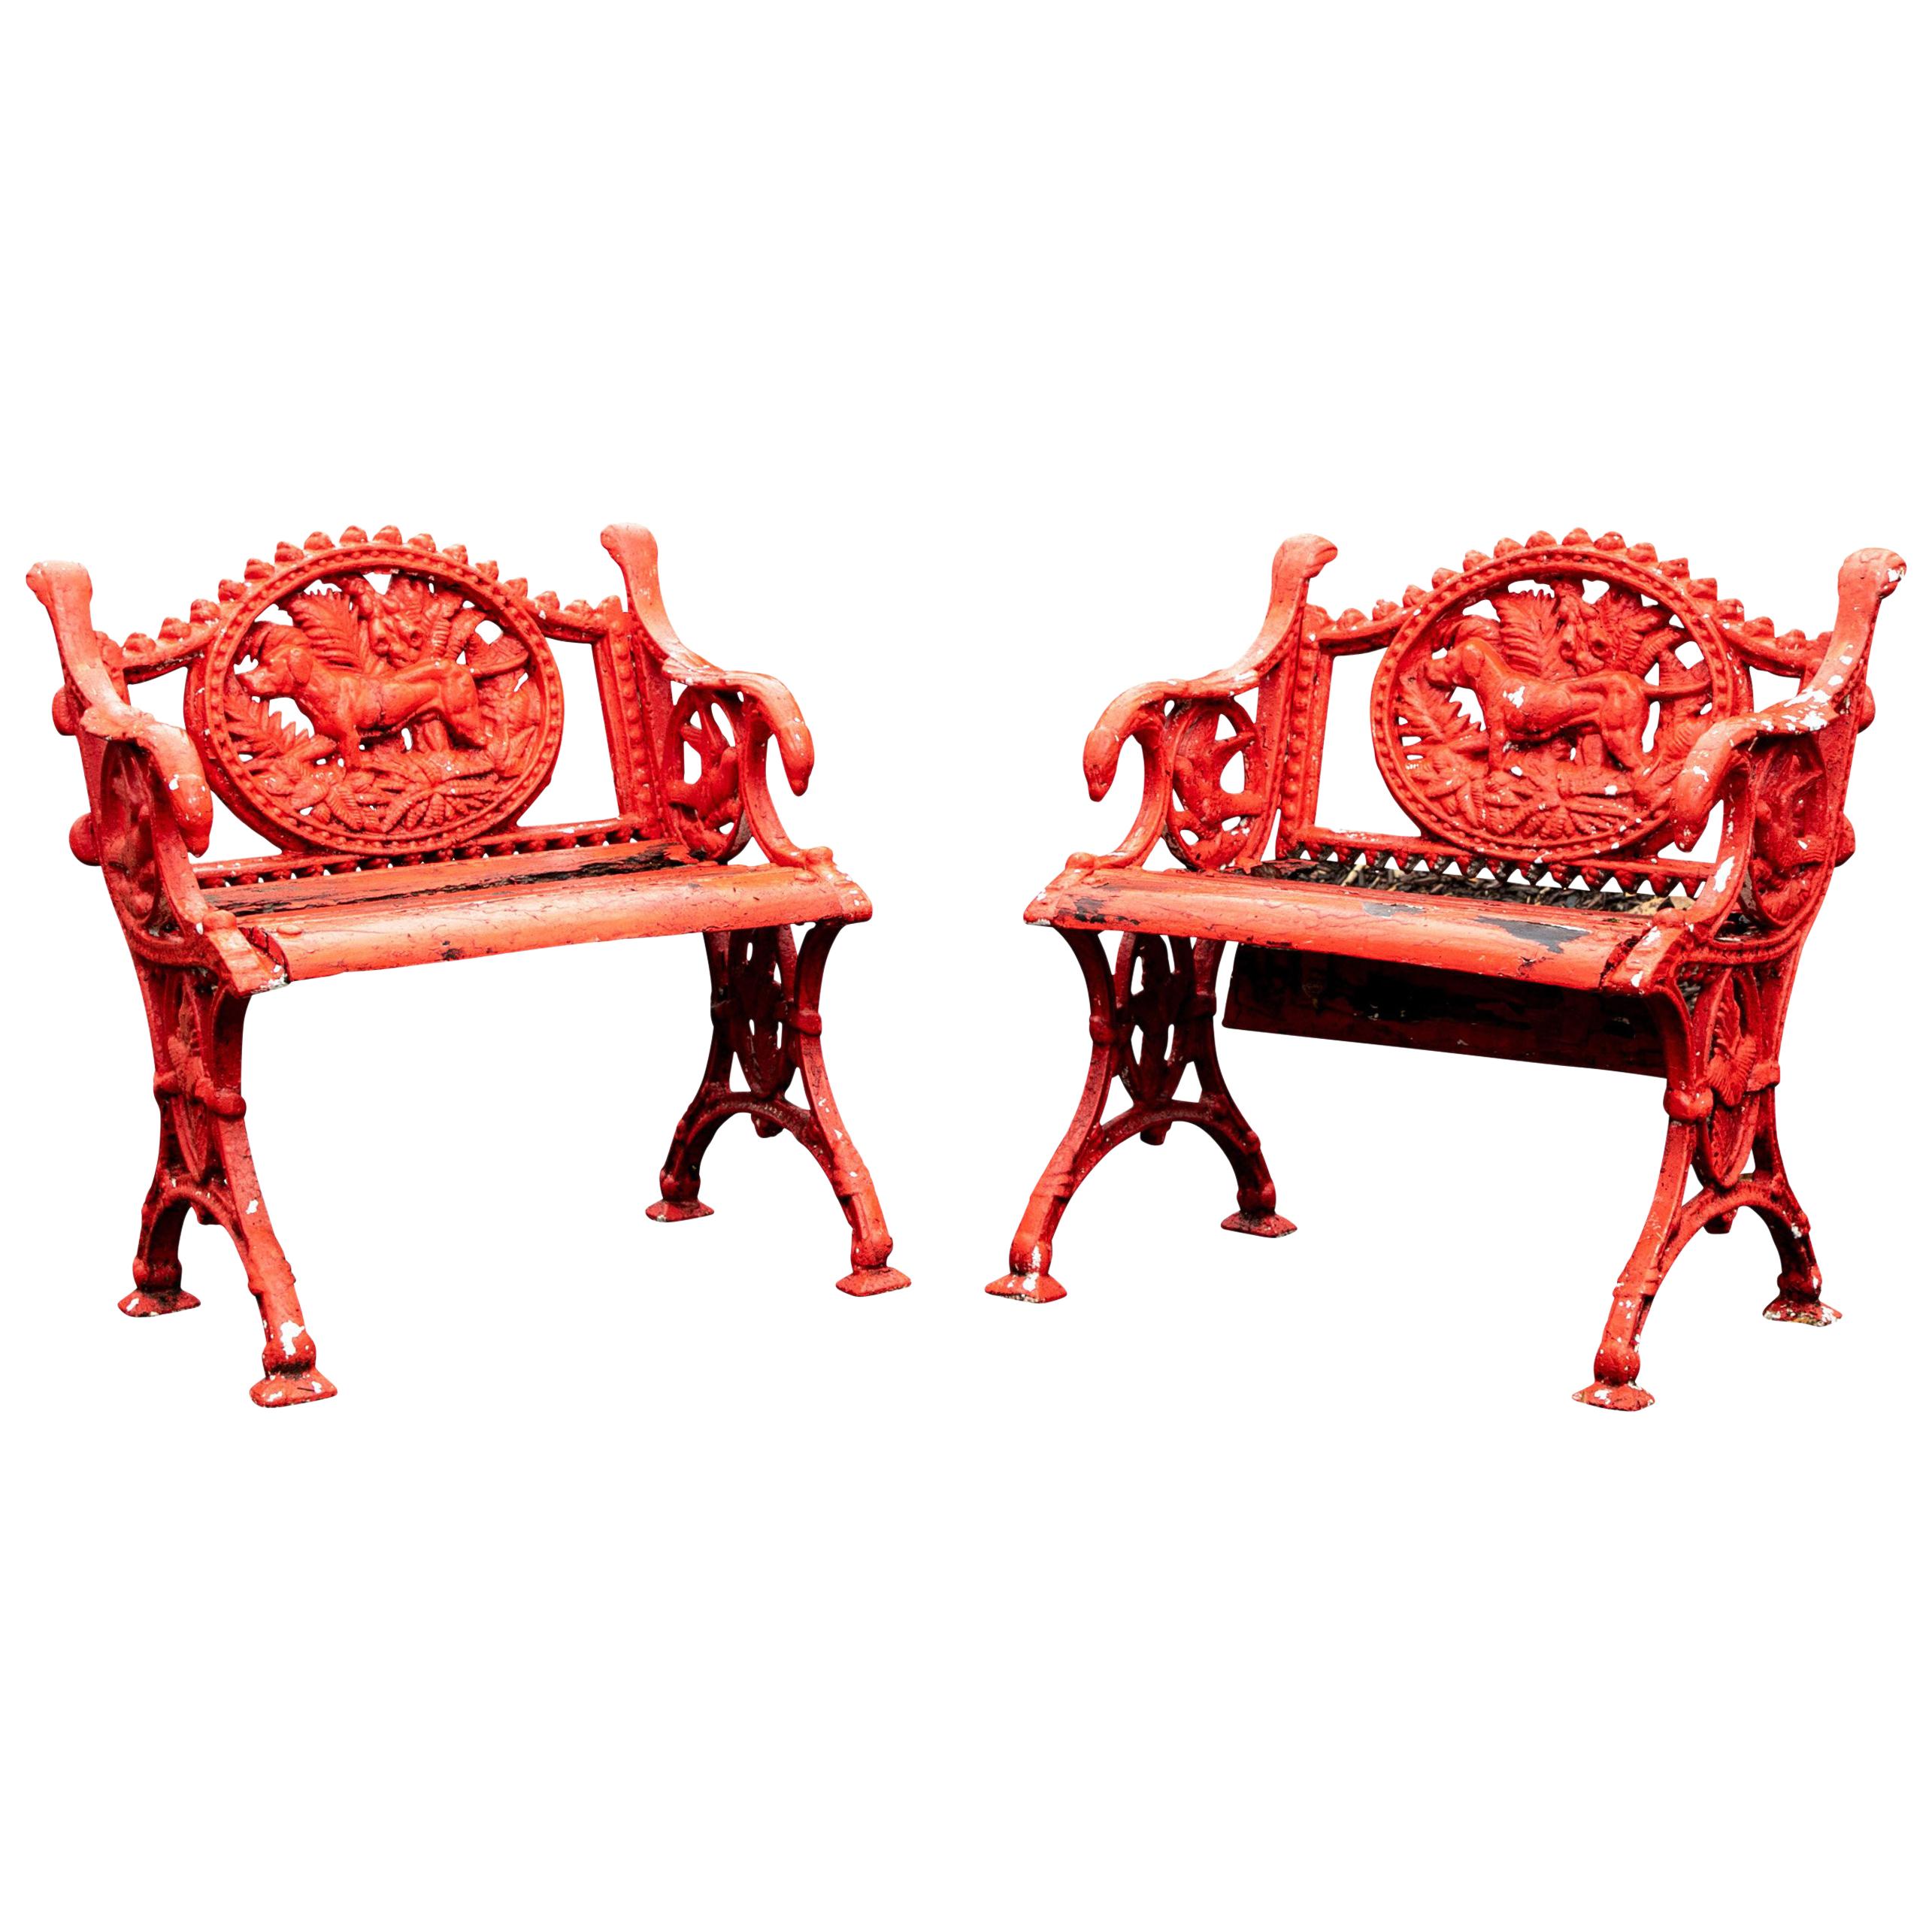 Pair of Antique Garden Armchairs in Red Paint